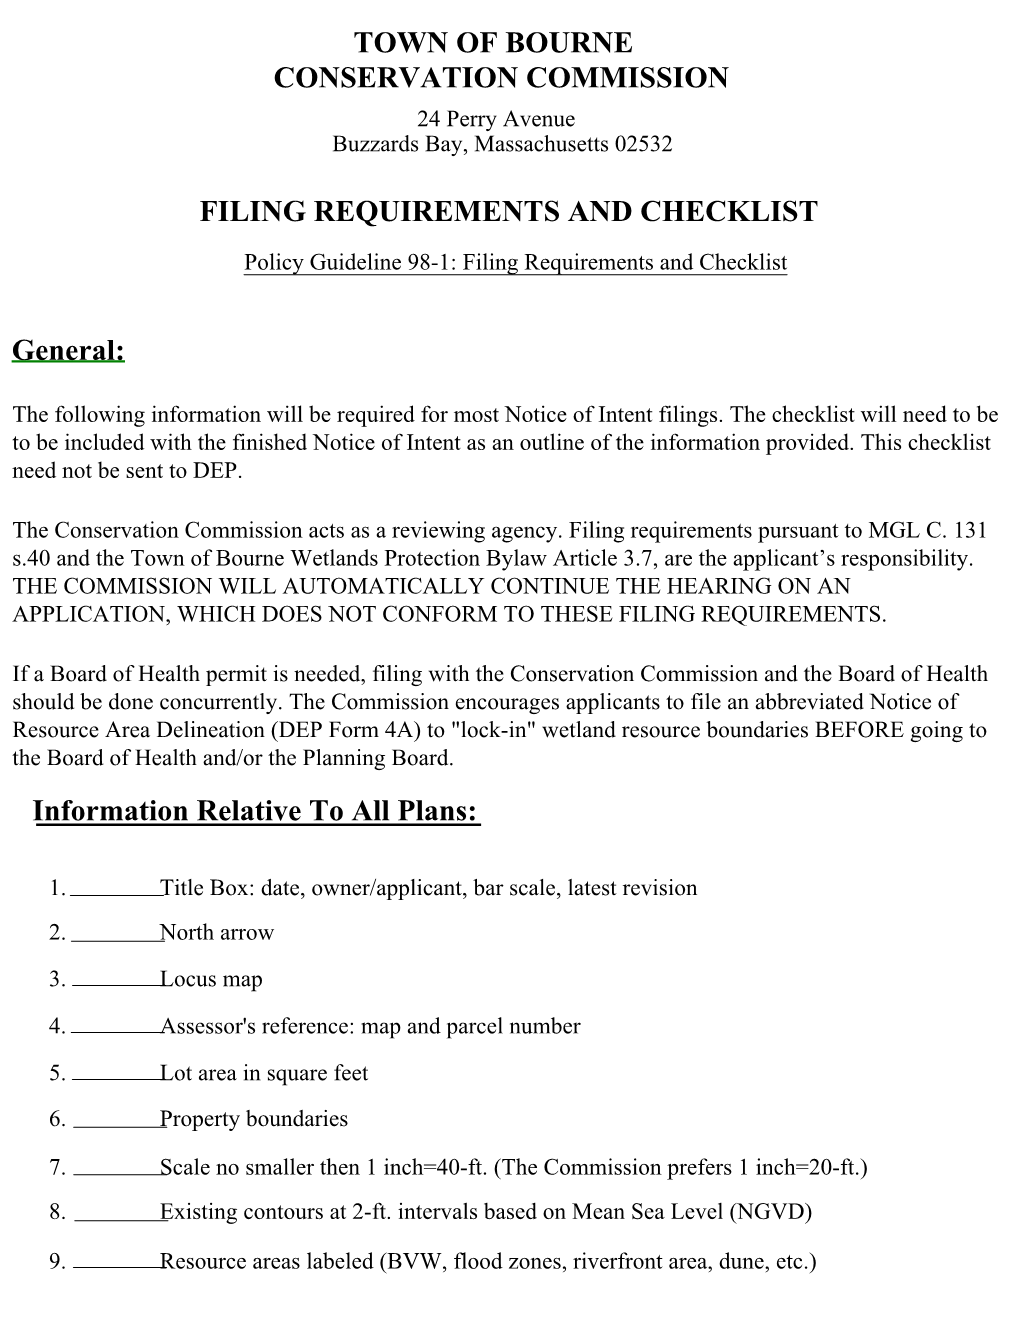 Filing Requirements and Checklist